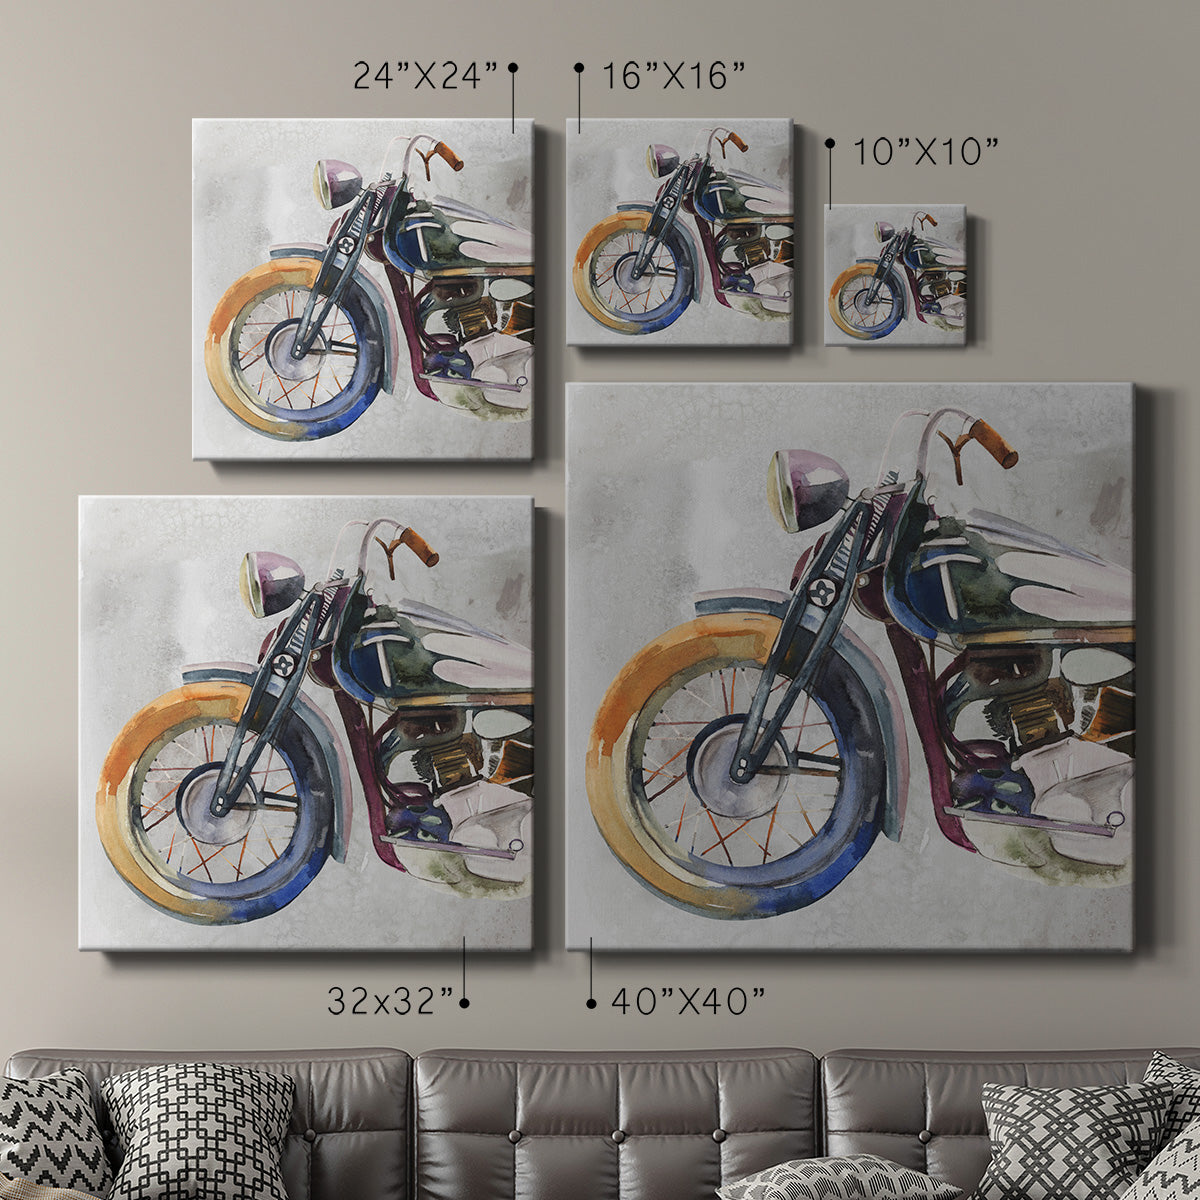 Moto Metal I-Premium Gallery Wrapped Canvas - Ready to Hang